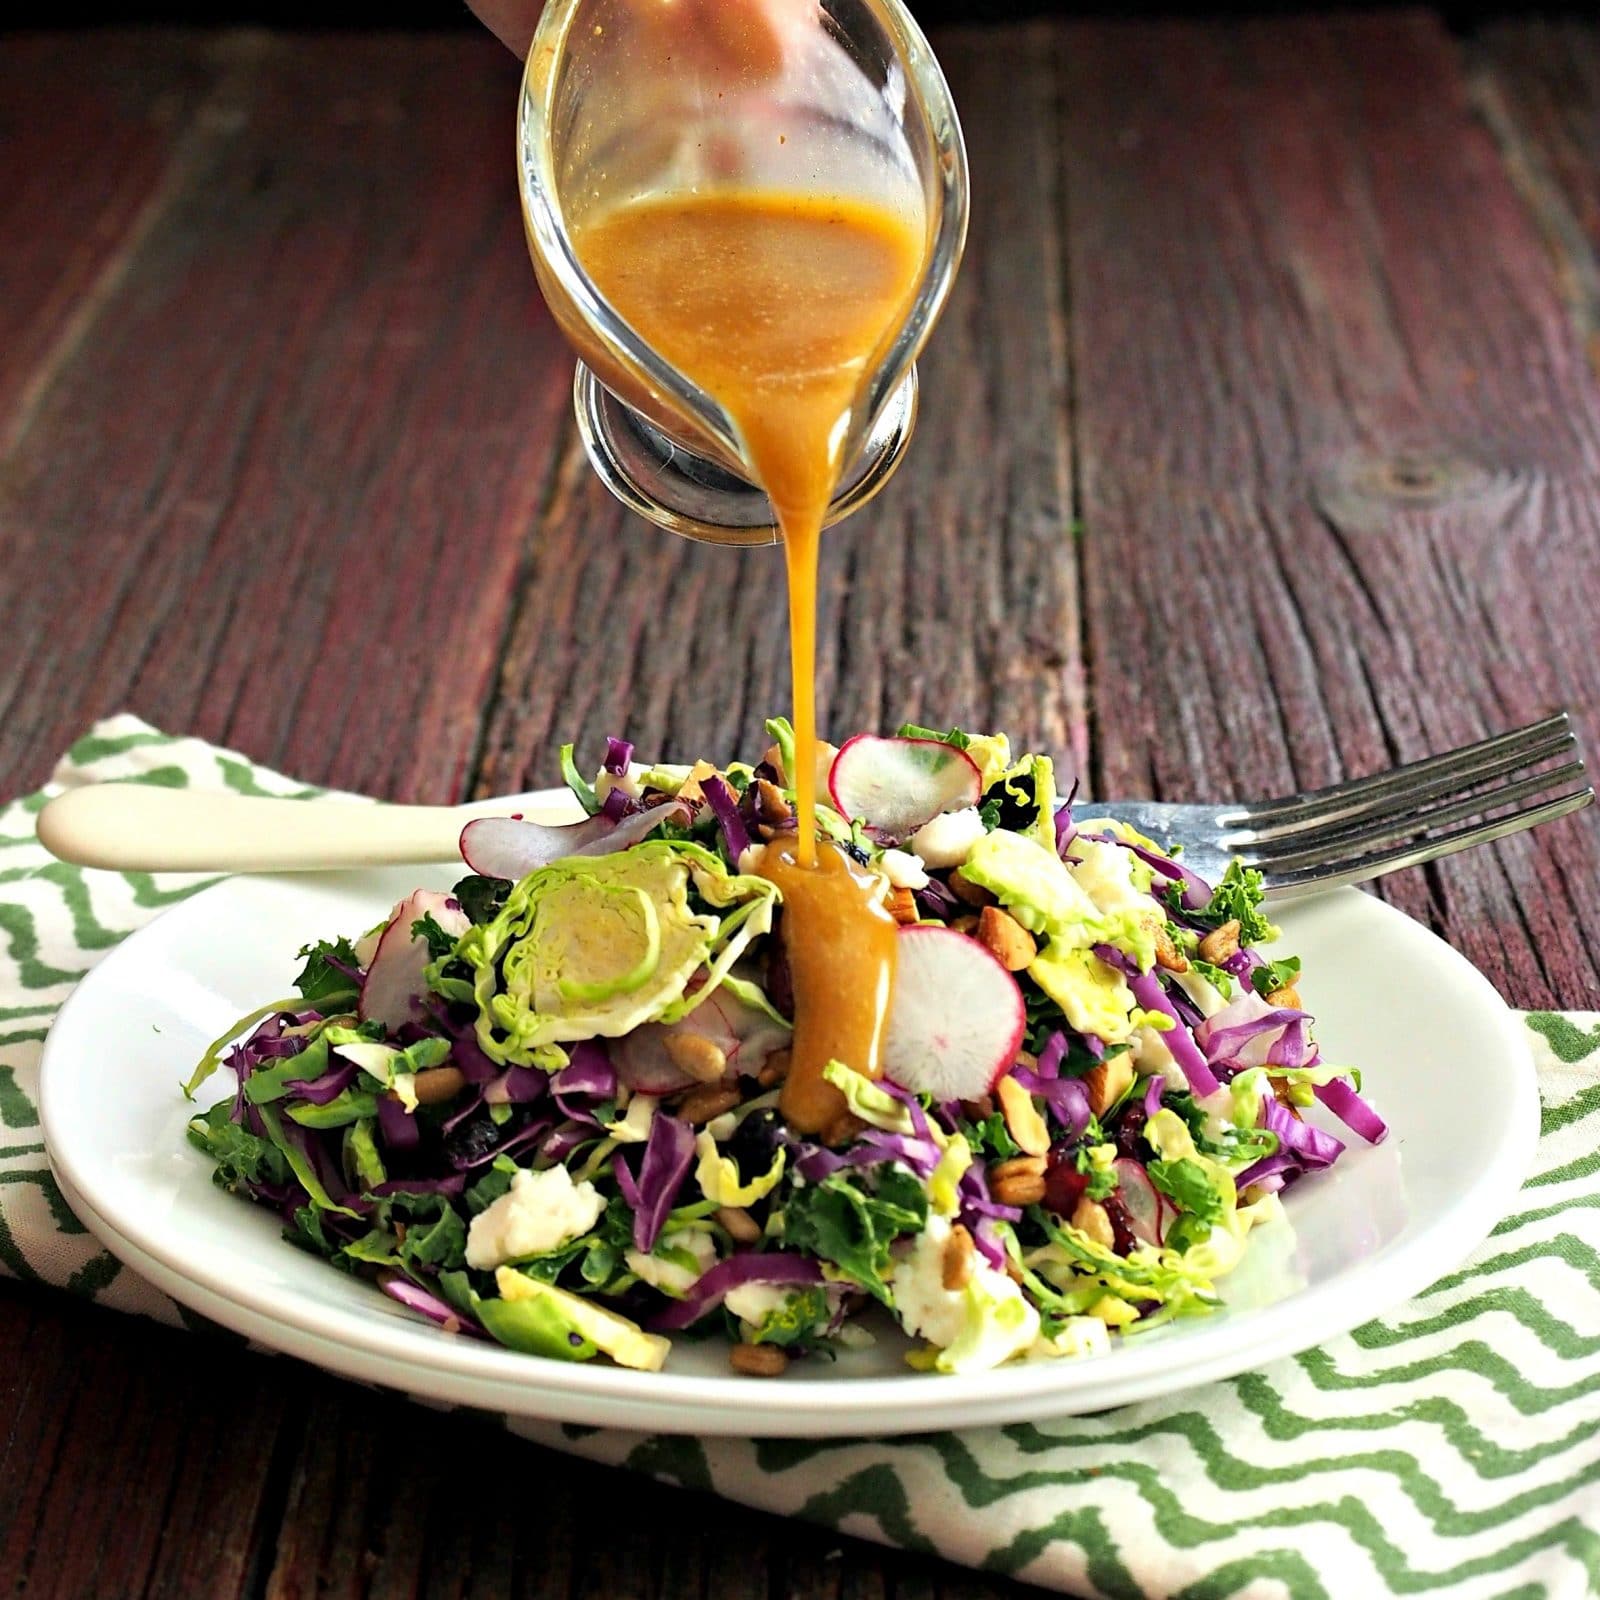 Spicy Honey Vinaigrette has a flavor profile that delivers a subtle punch without TKOing the taste buds. Cider vinegar, honey, soy sauce, garlic & ginger. Simply Sated